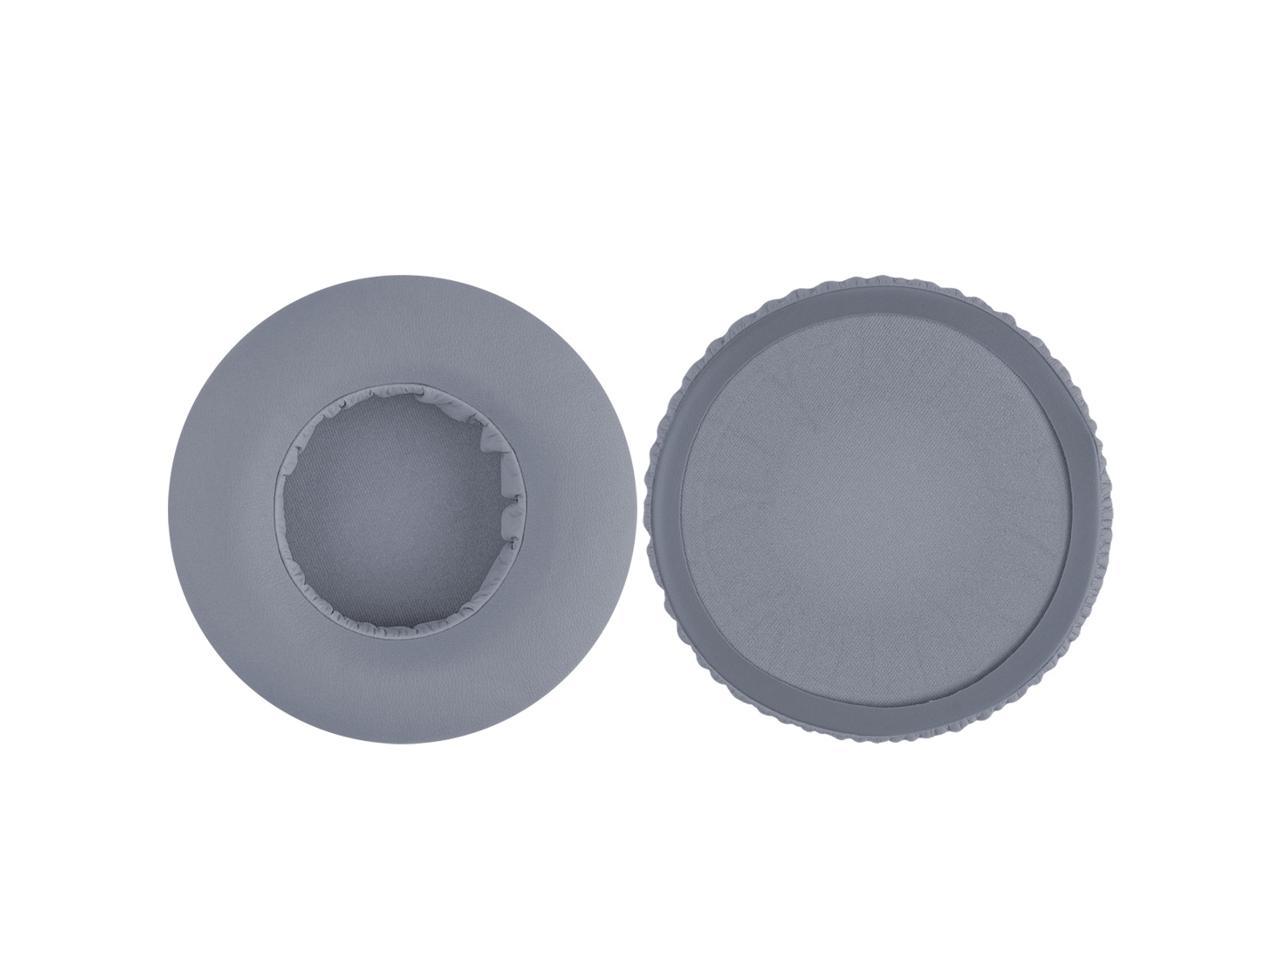 Headset Ear Cushion Repair Parts Geekria QuickFit Protein Leather Replacement Ear Pads for AKG K550 Grey K553 MKII Headphones Earpads K551